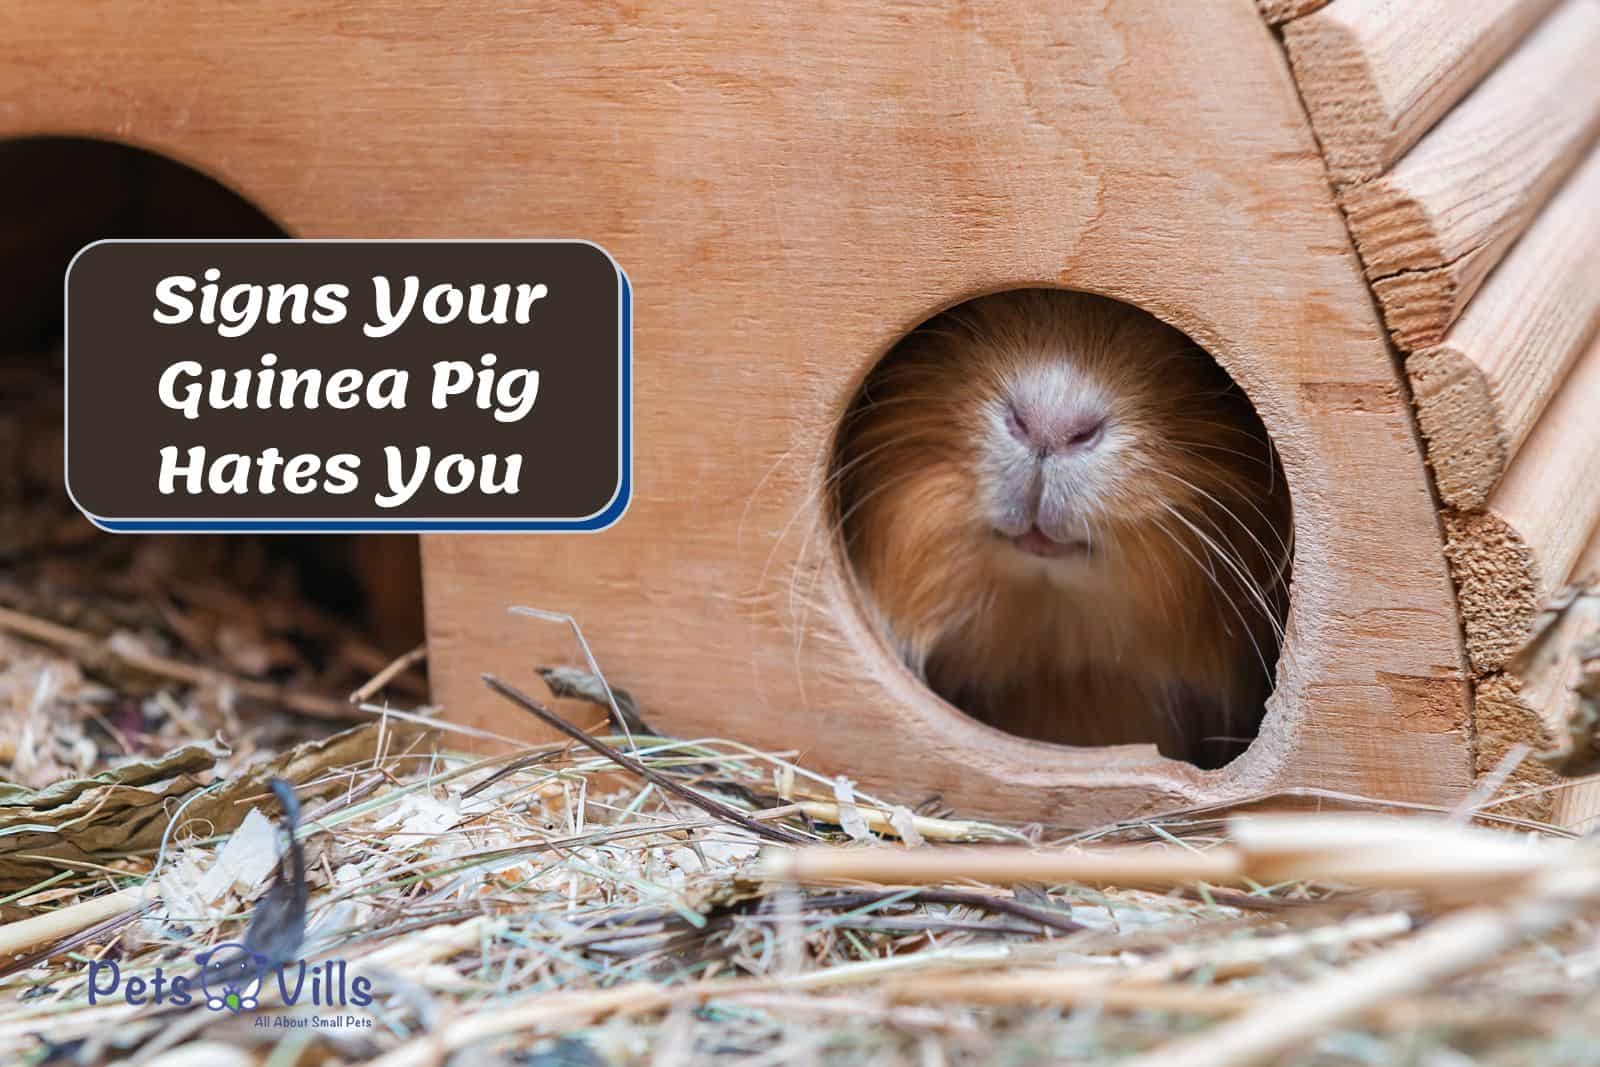 GUINEA PIG HIDING inside the wooden hutch but what are the signs your guinea pig hates you